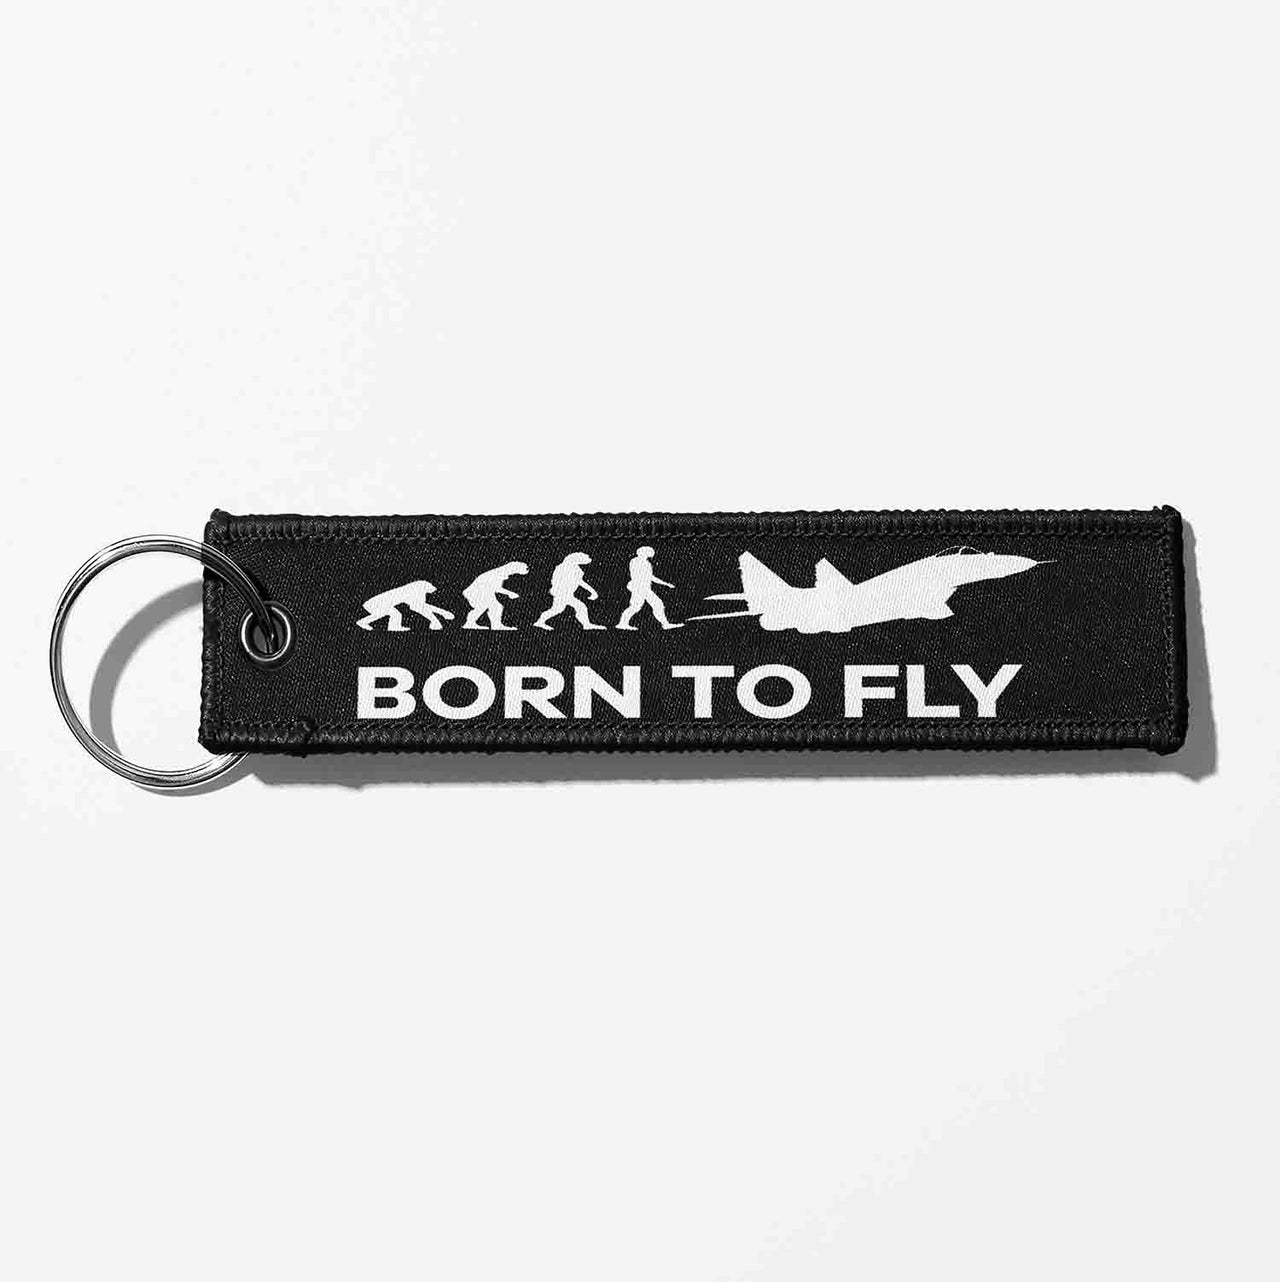 Born To Fly (Military) Designed Key Chains